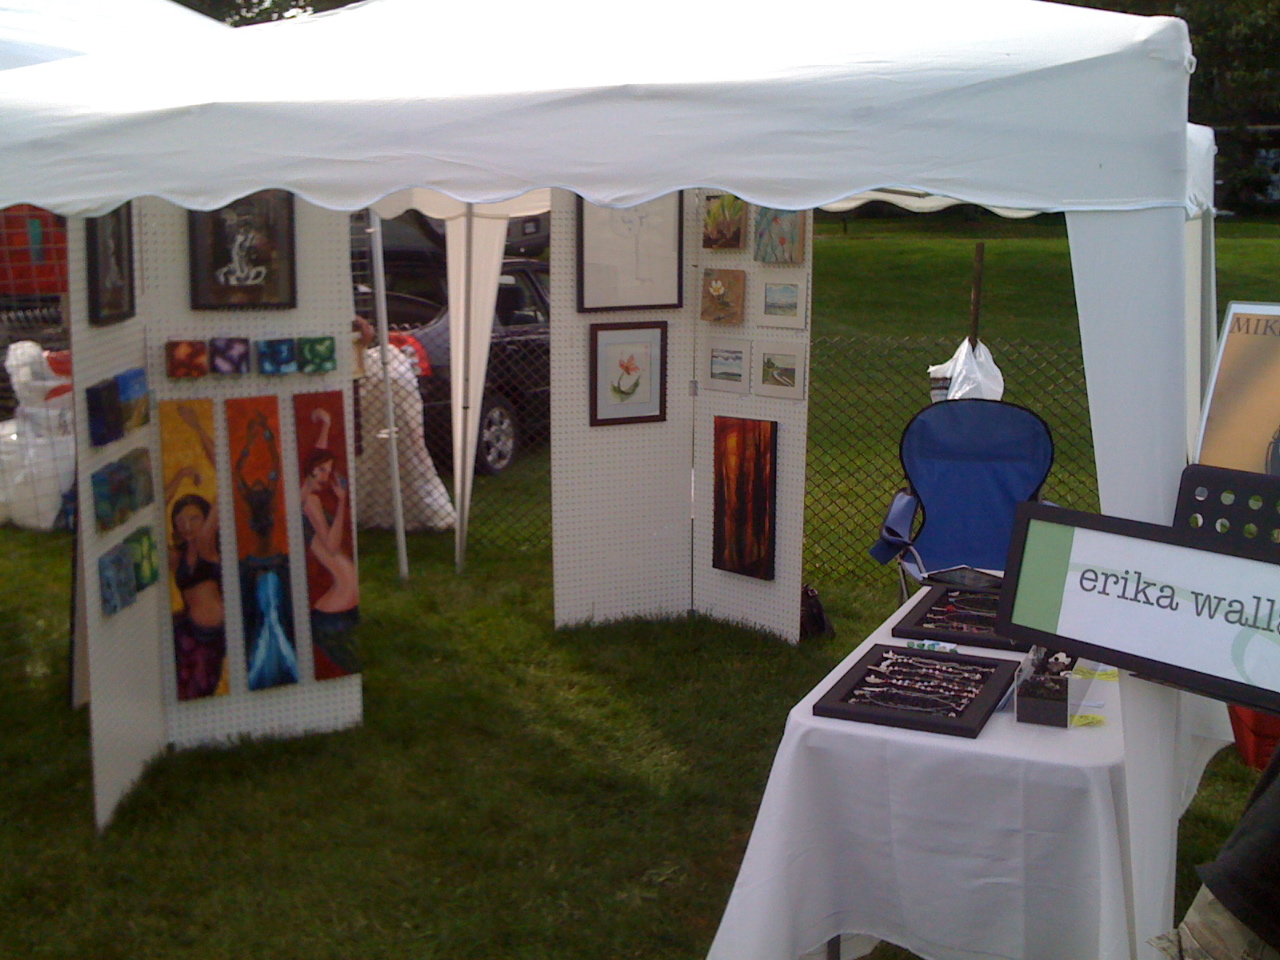 My 4th year at Art in the Park